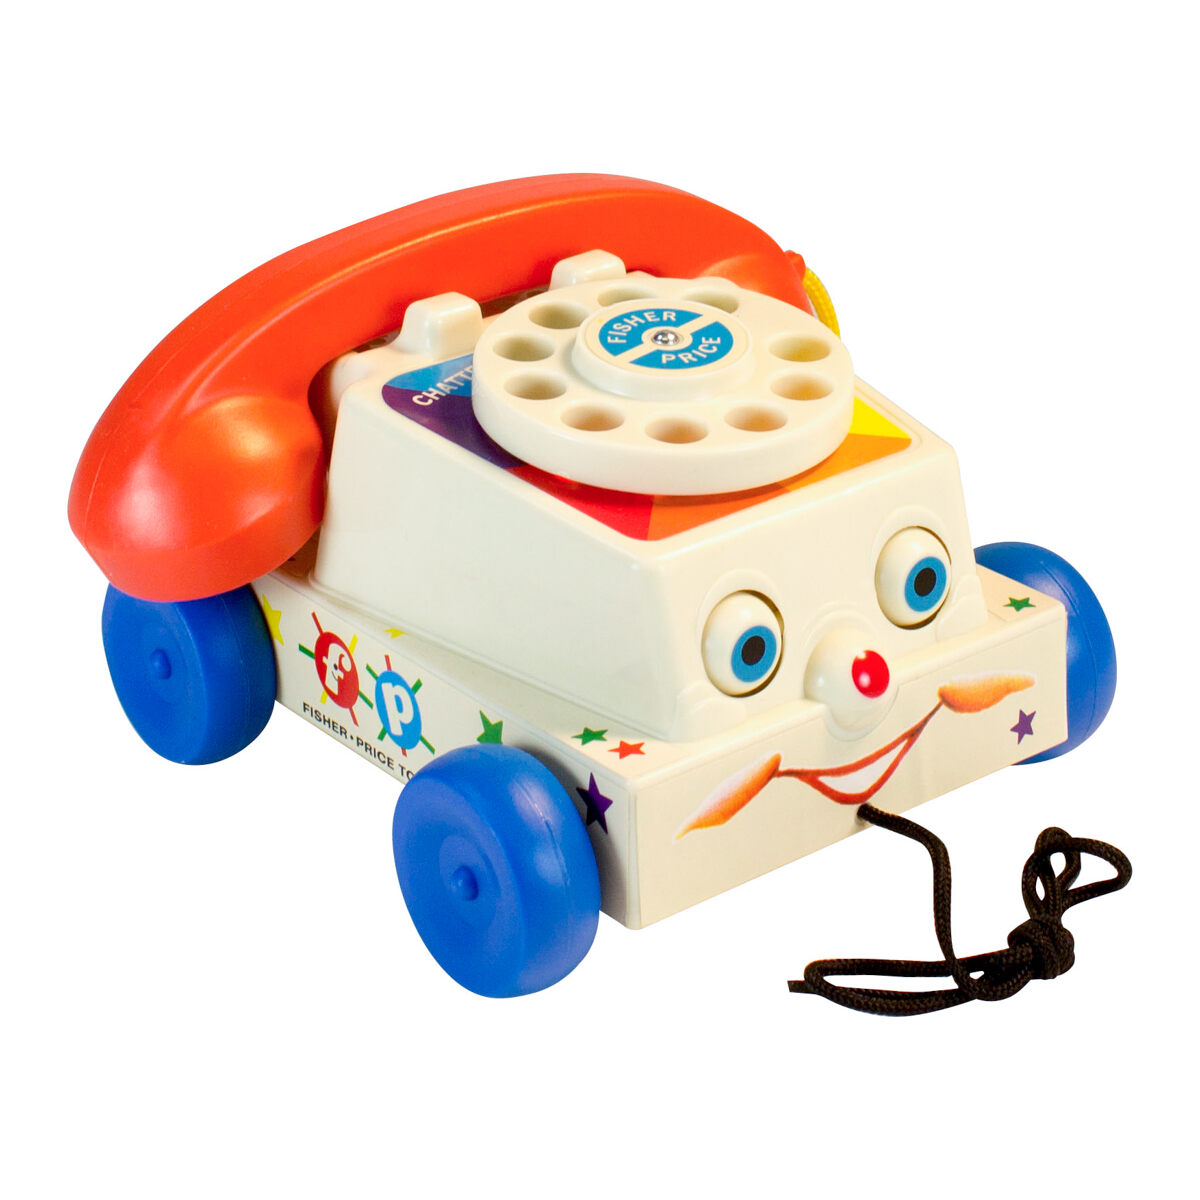 Vintage Toys Classic Chatter Phone Pull Toy Telephone Ringing Rotary Preschool 